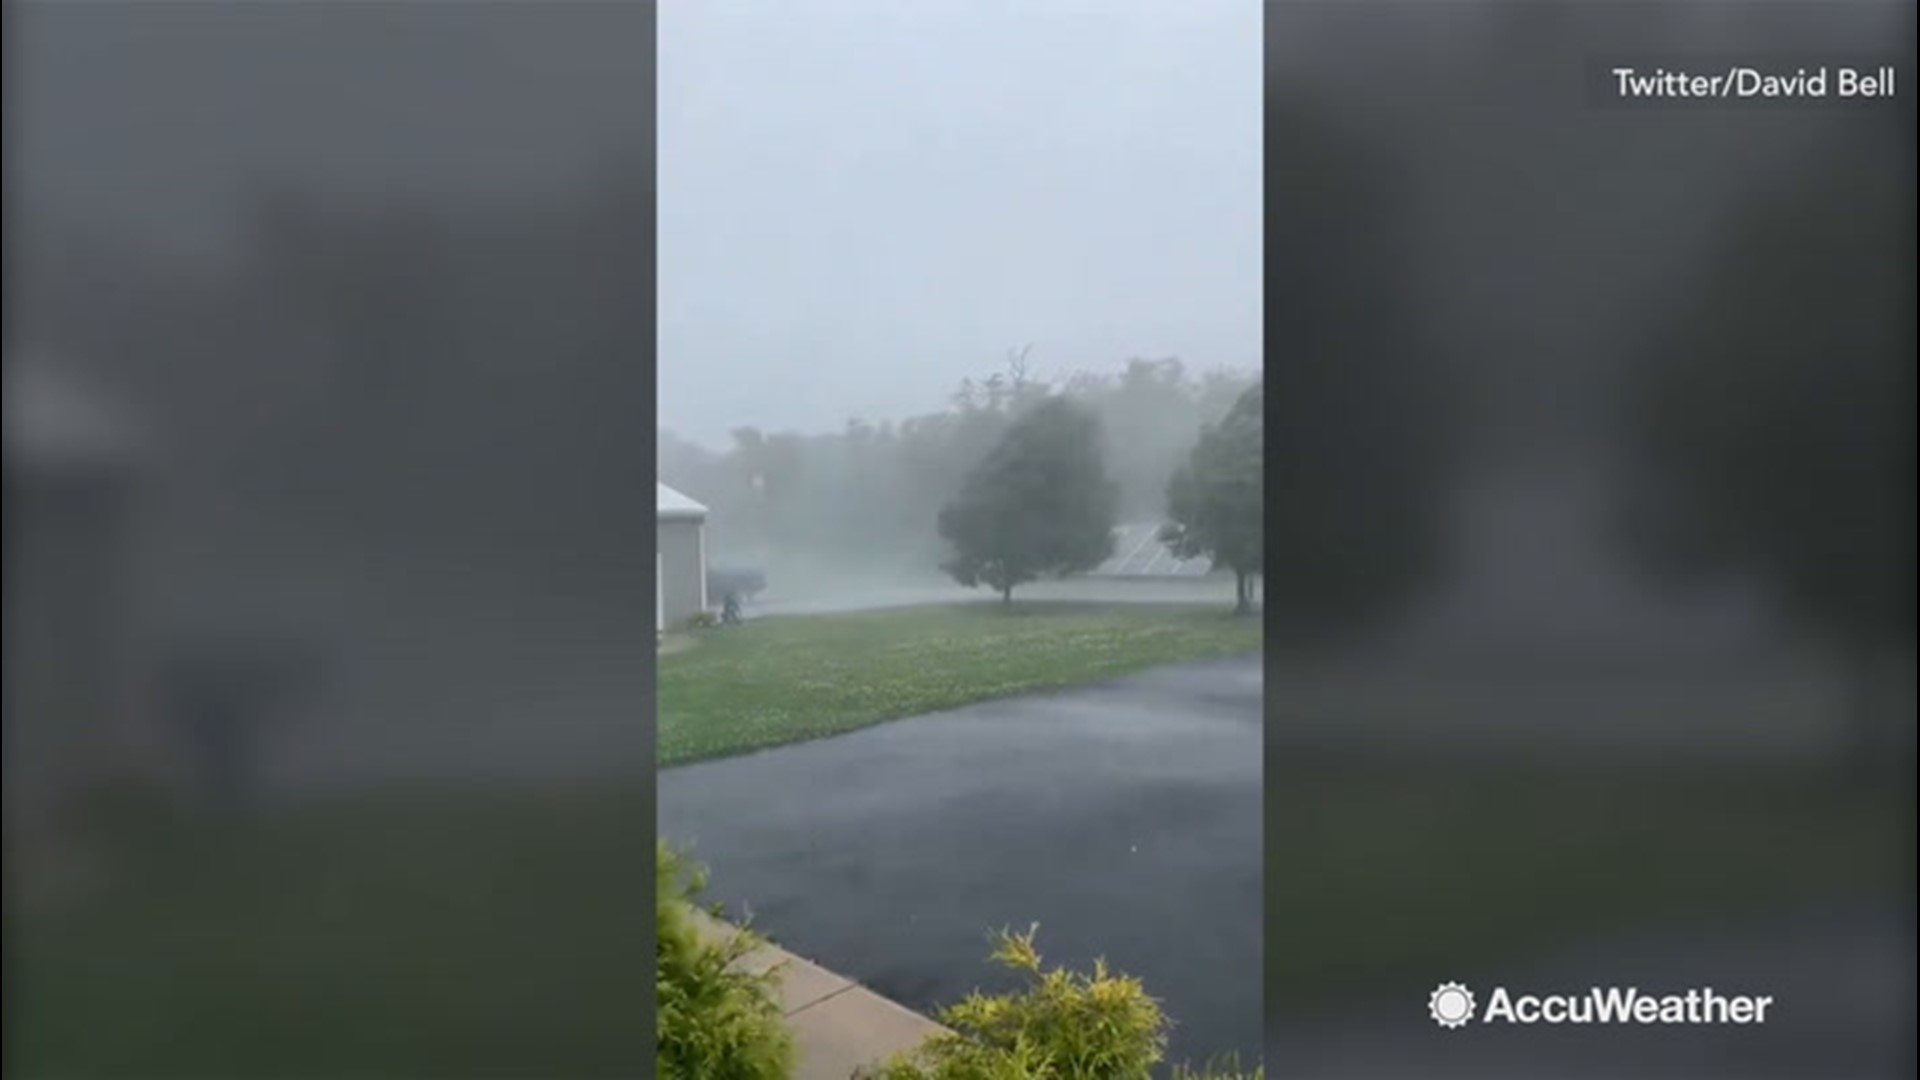 On June 20, heavy storms pounded Richland, New Jersey with violent rains. While not expected to last a long time, flash flood warnings were broadcast to the town, and the surrounding areas.